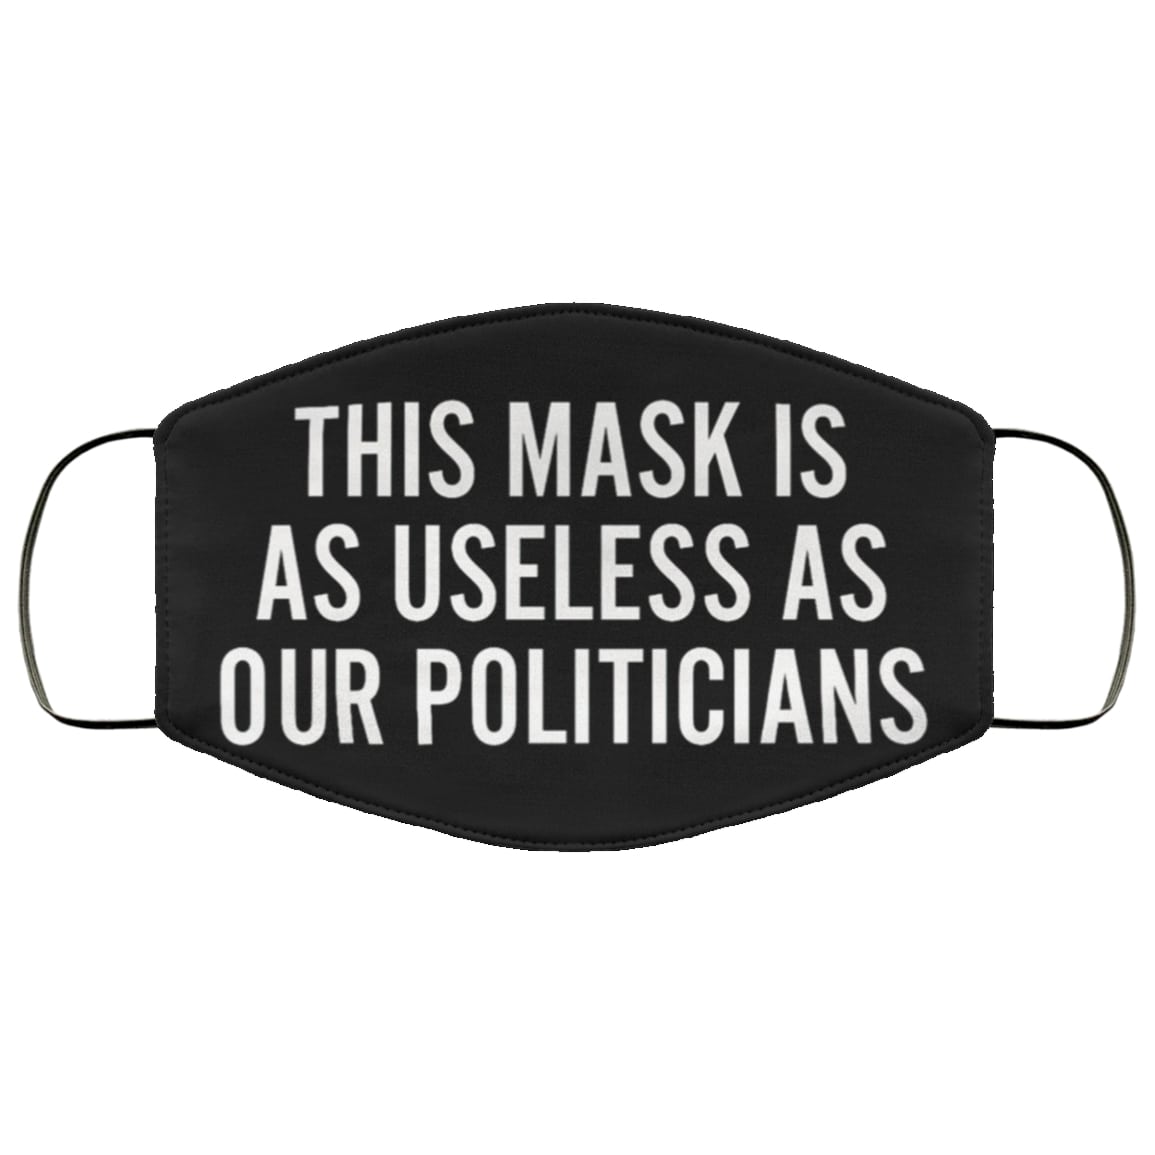 This mask is as useless as our politicians face mask